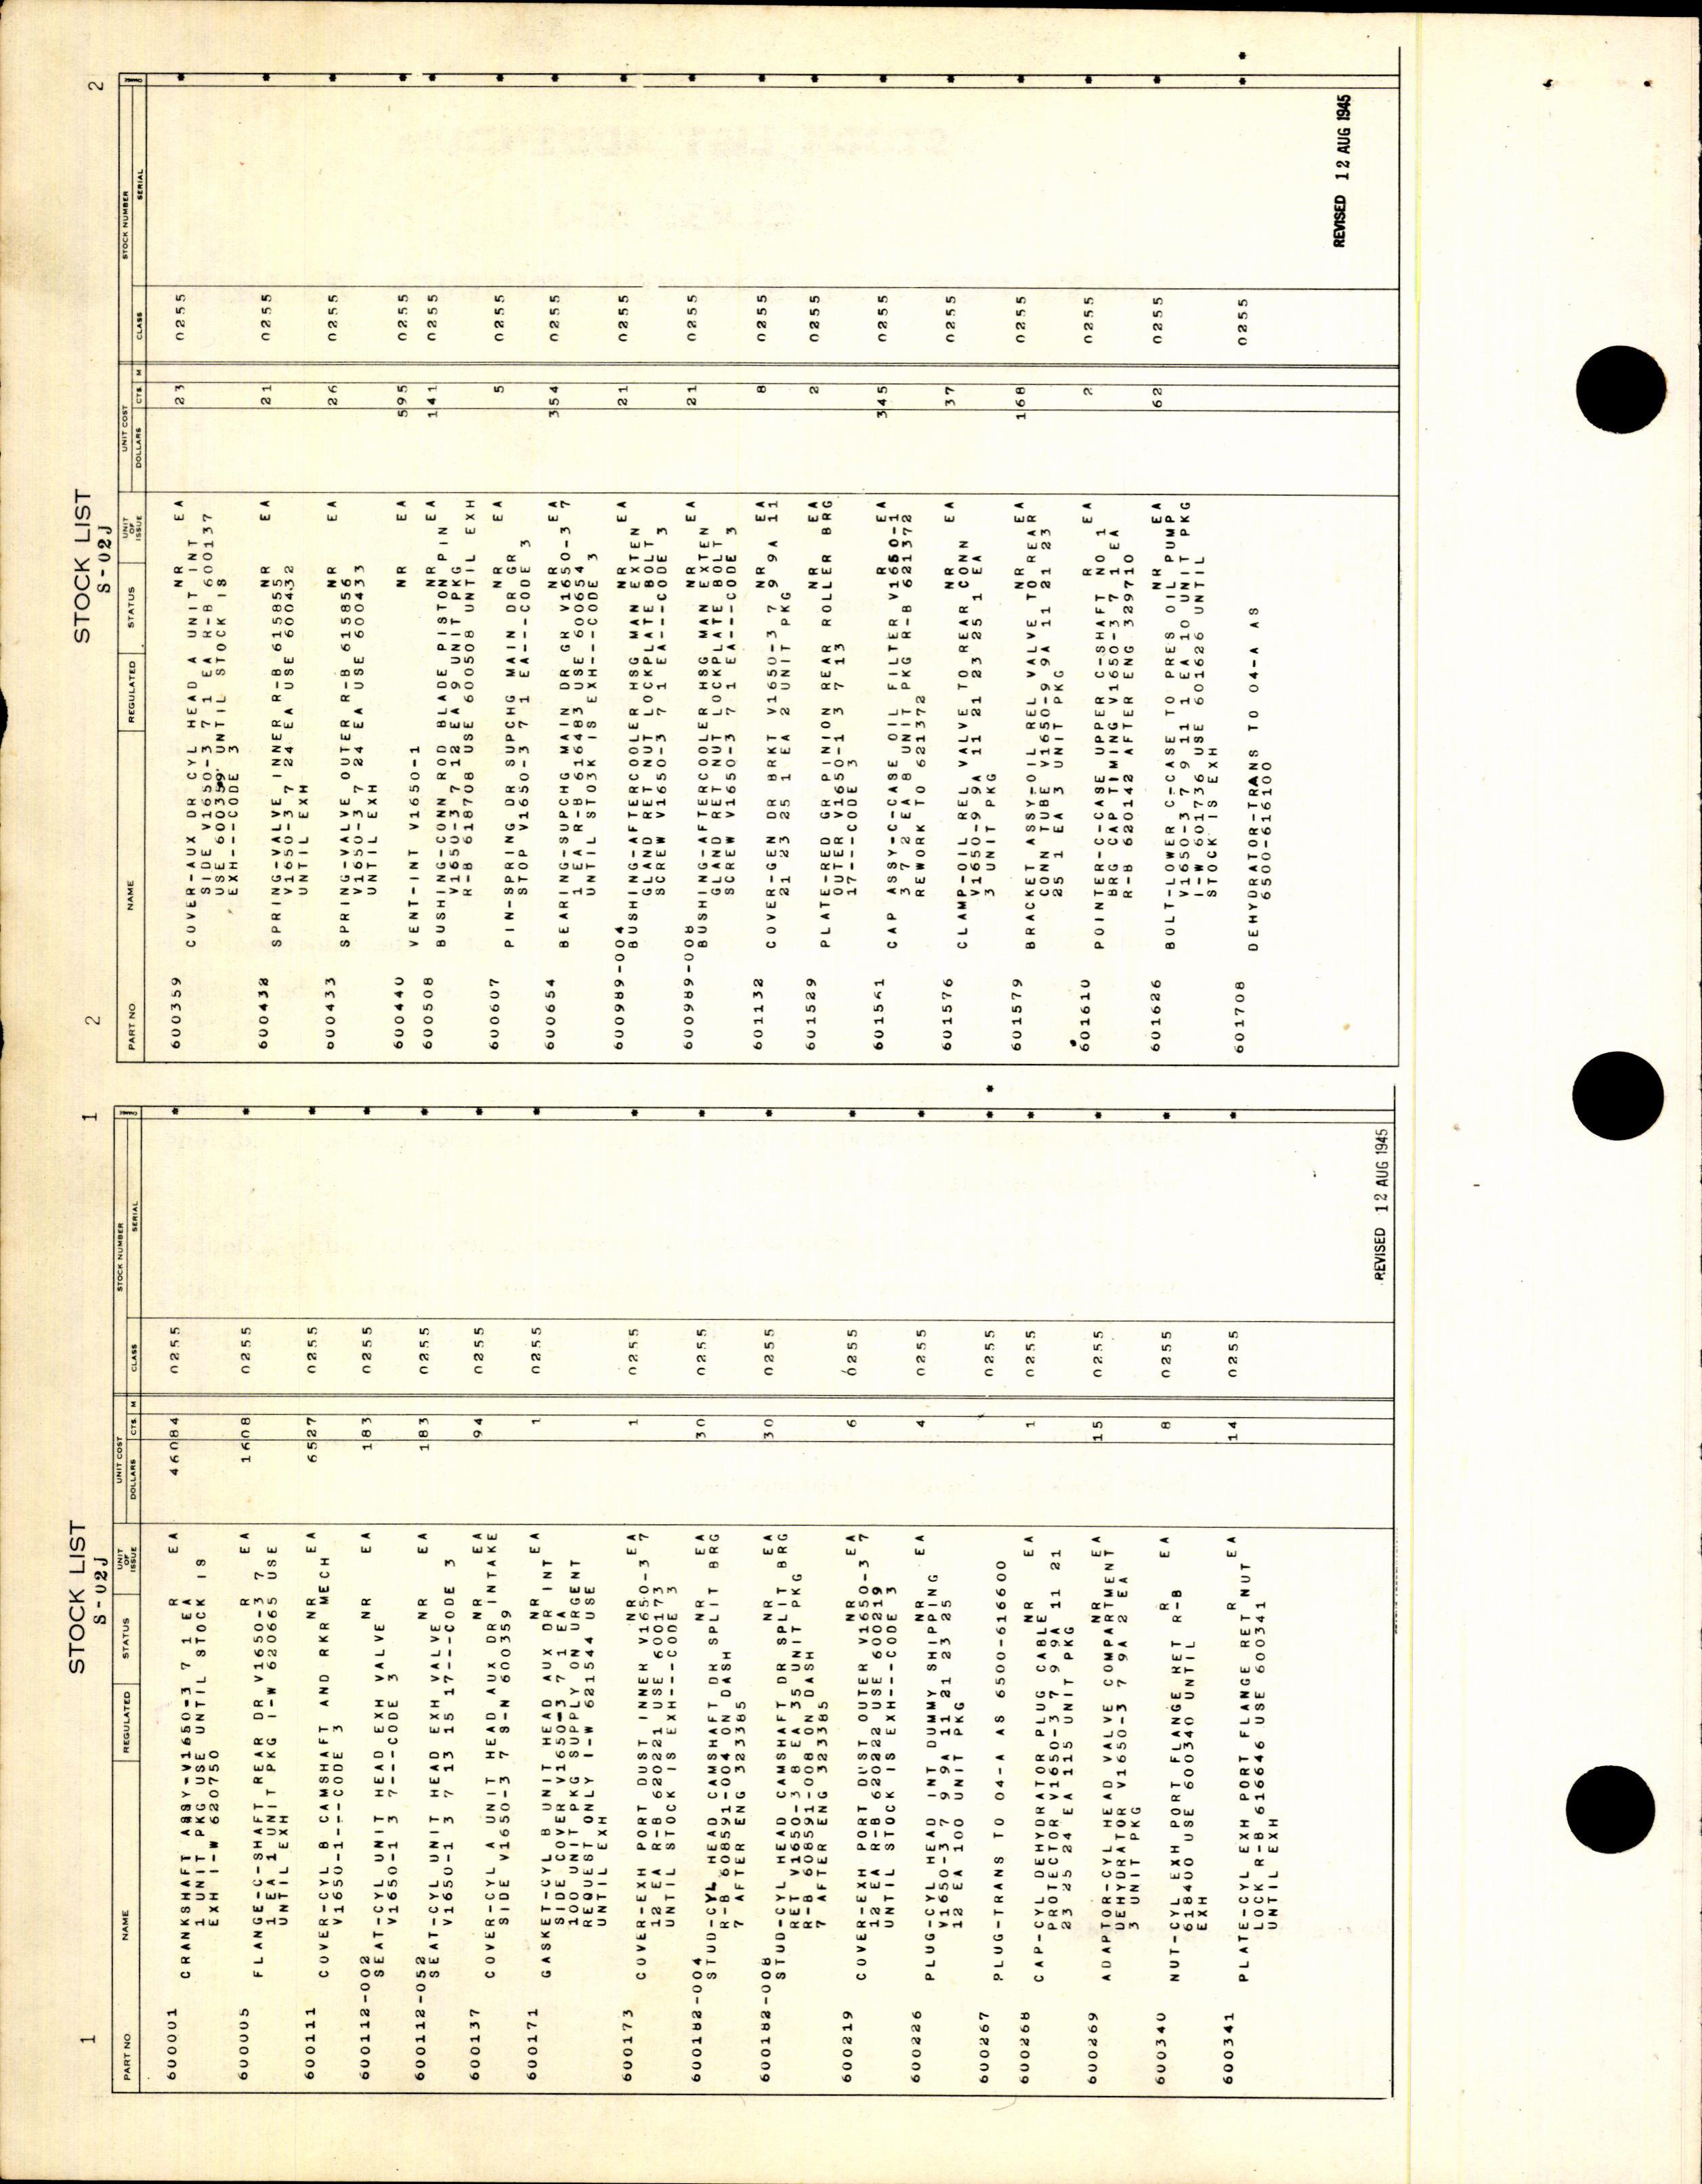 Sample page 4 from AirCorps Library document: Stock List Parts for Rolls-Royce Engines